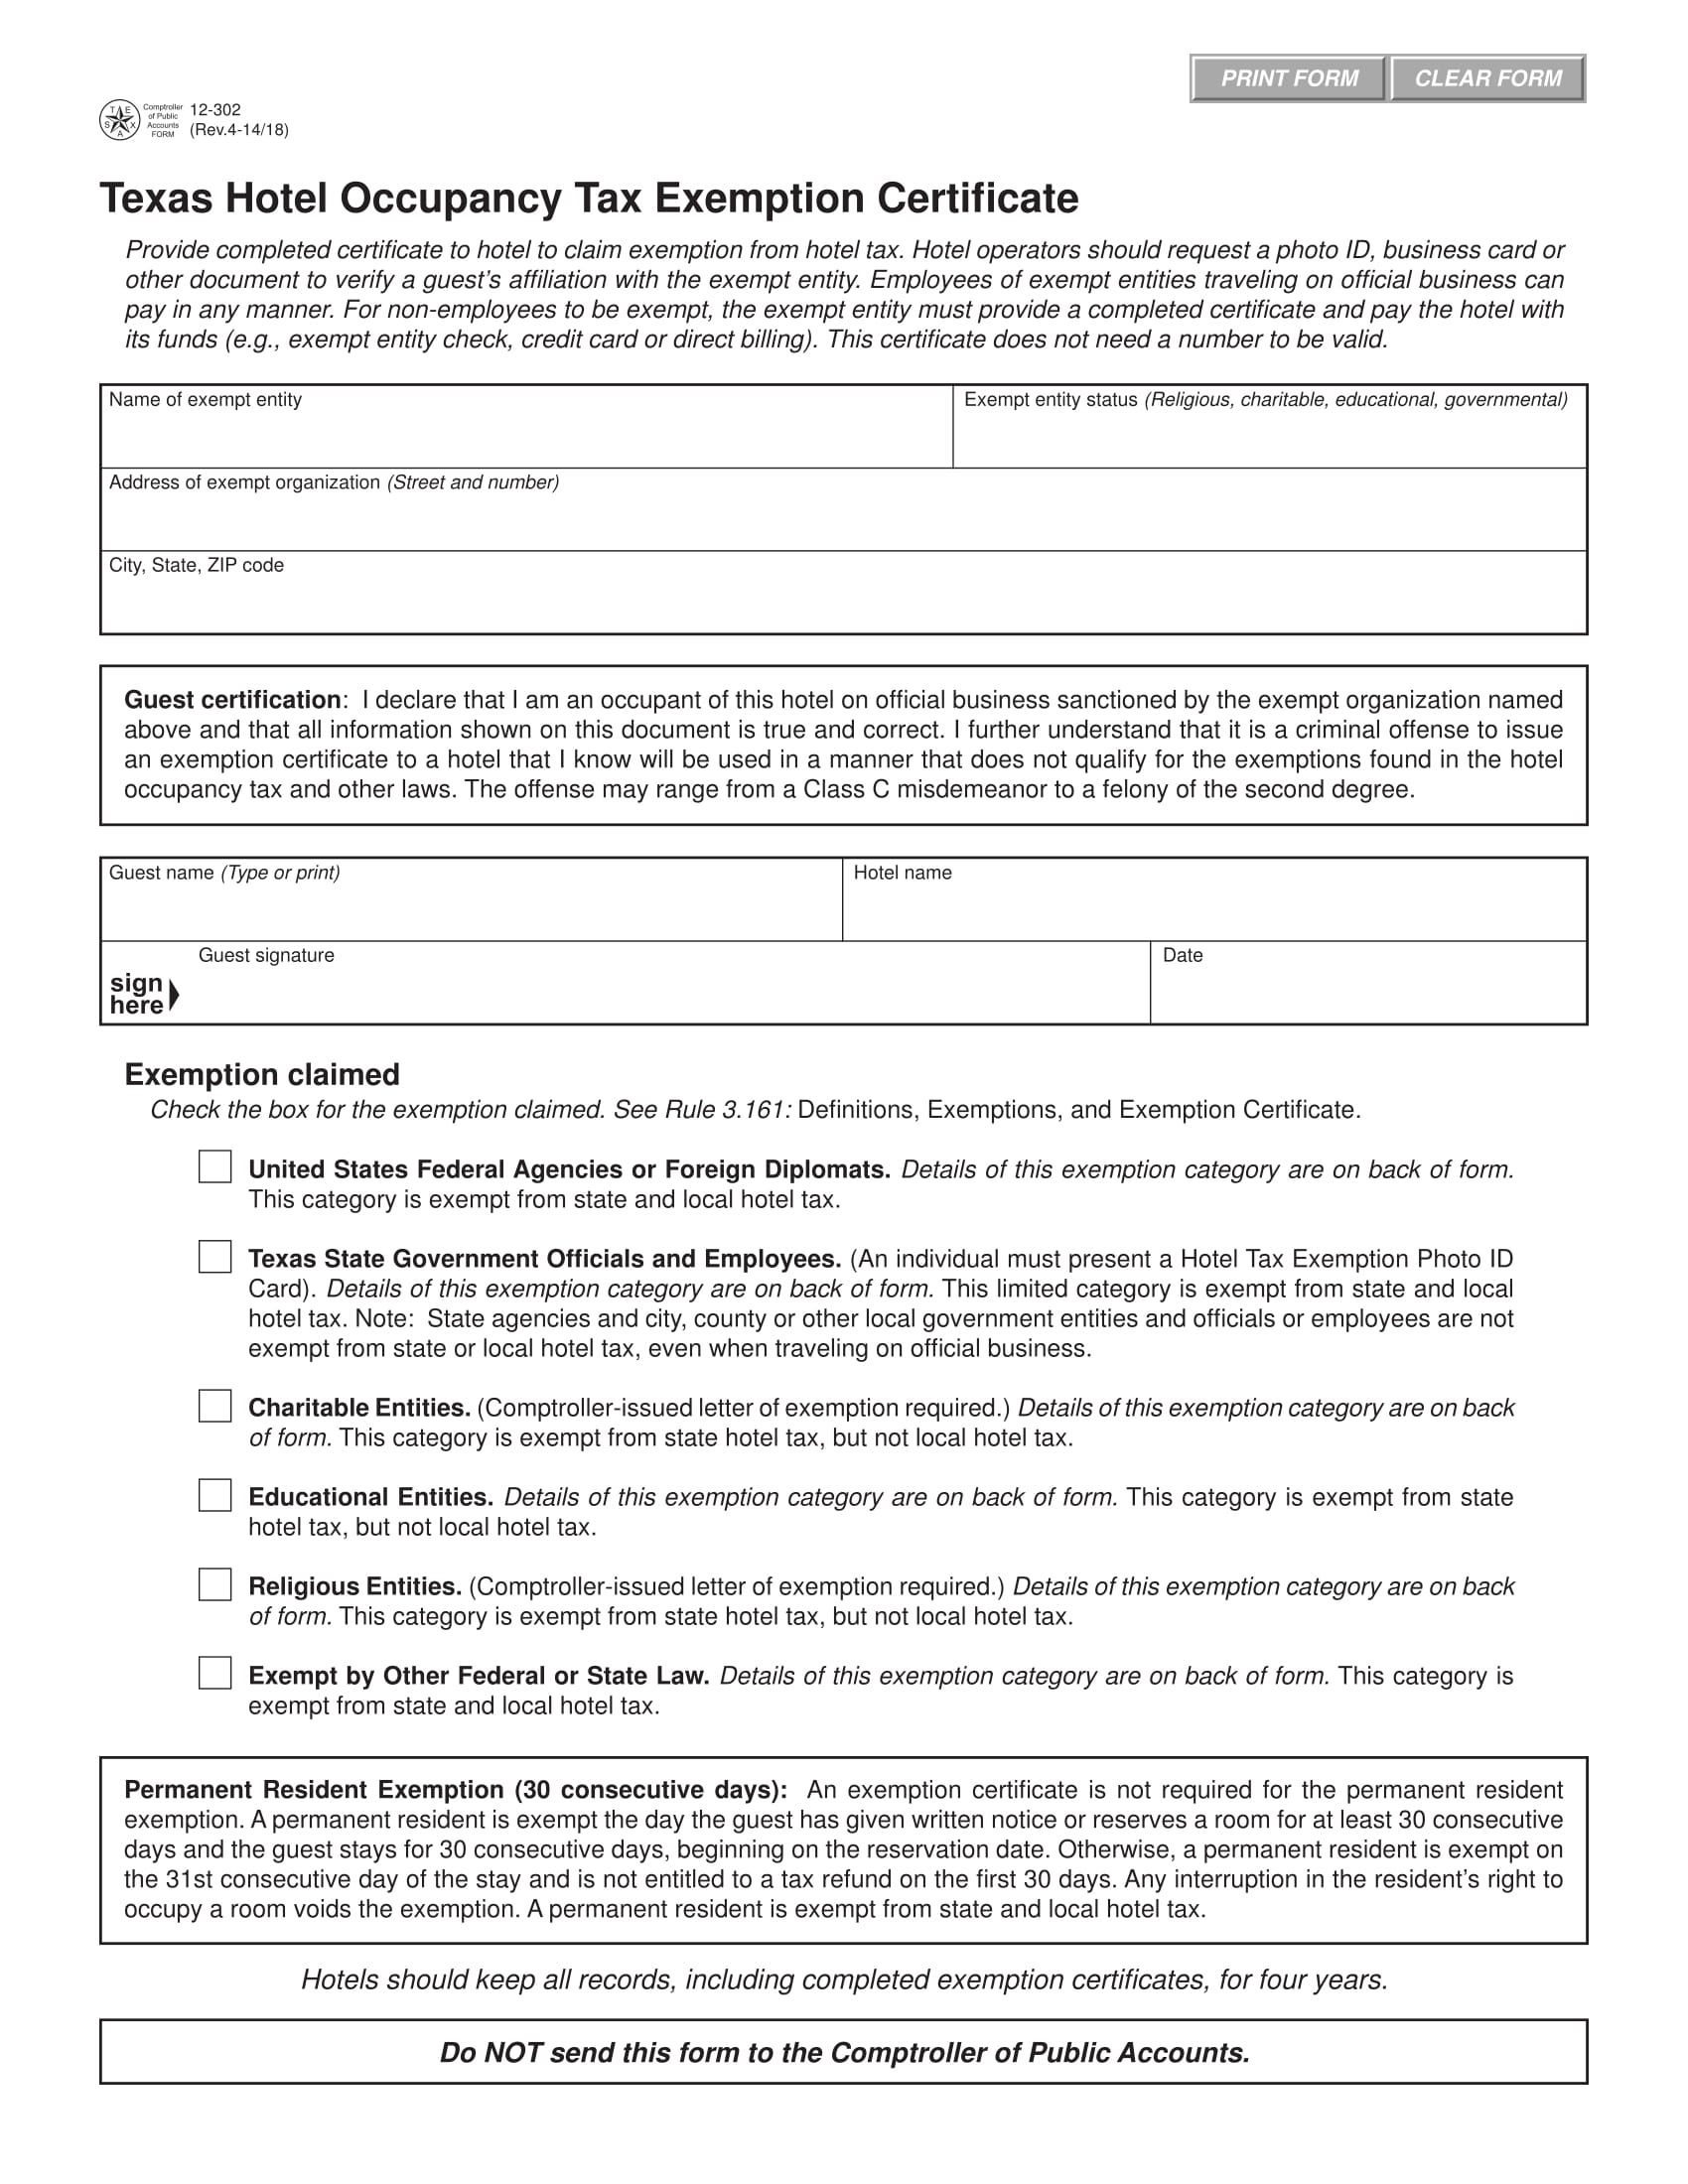 hotel occupancy tax exemption form 1